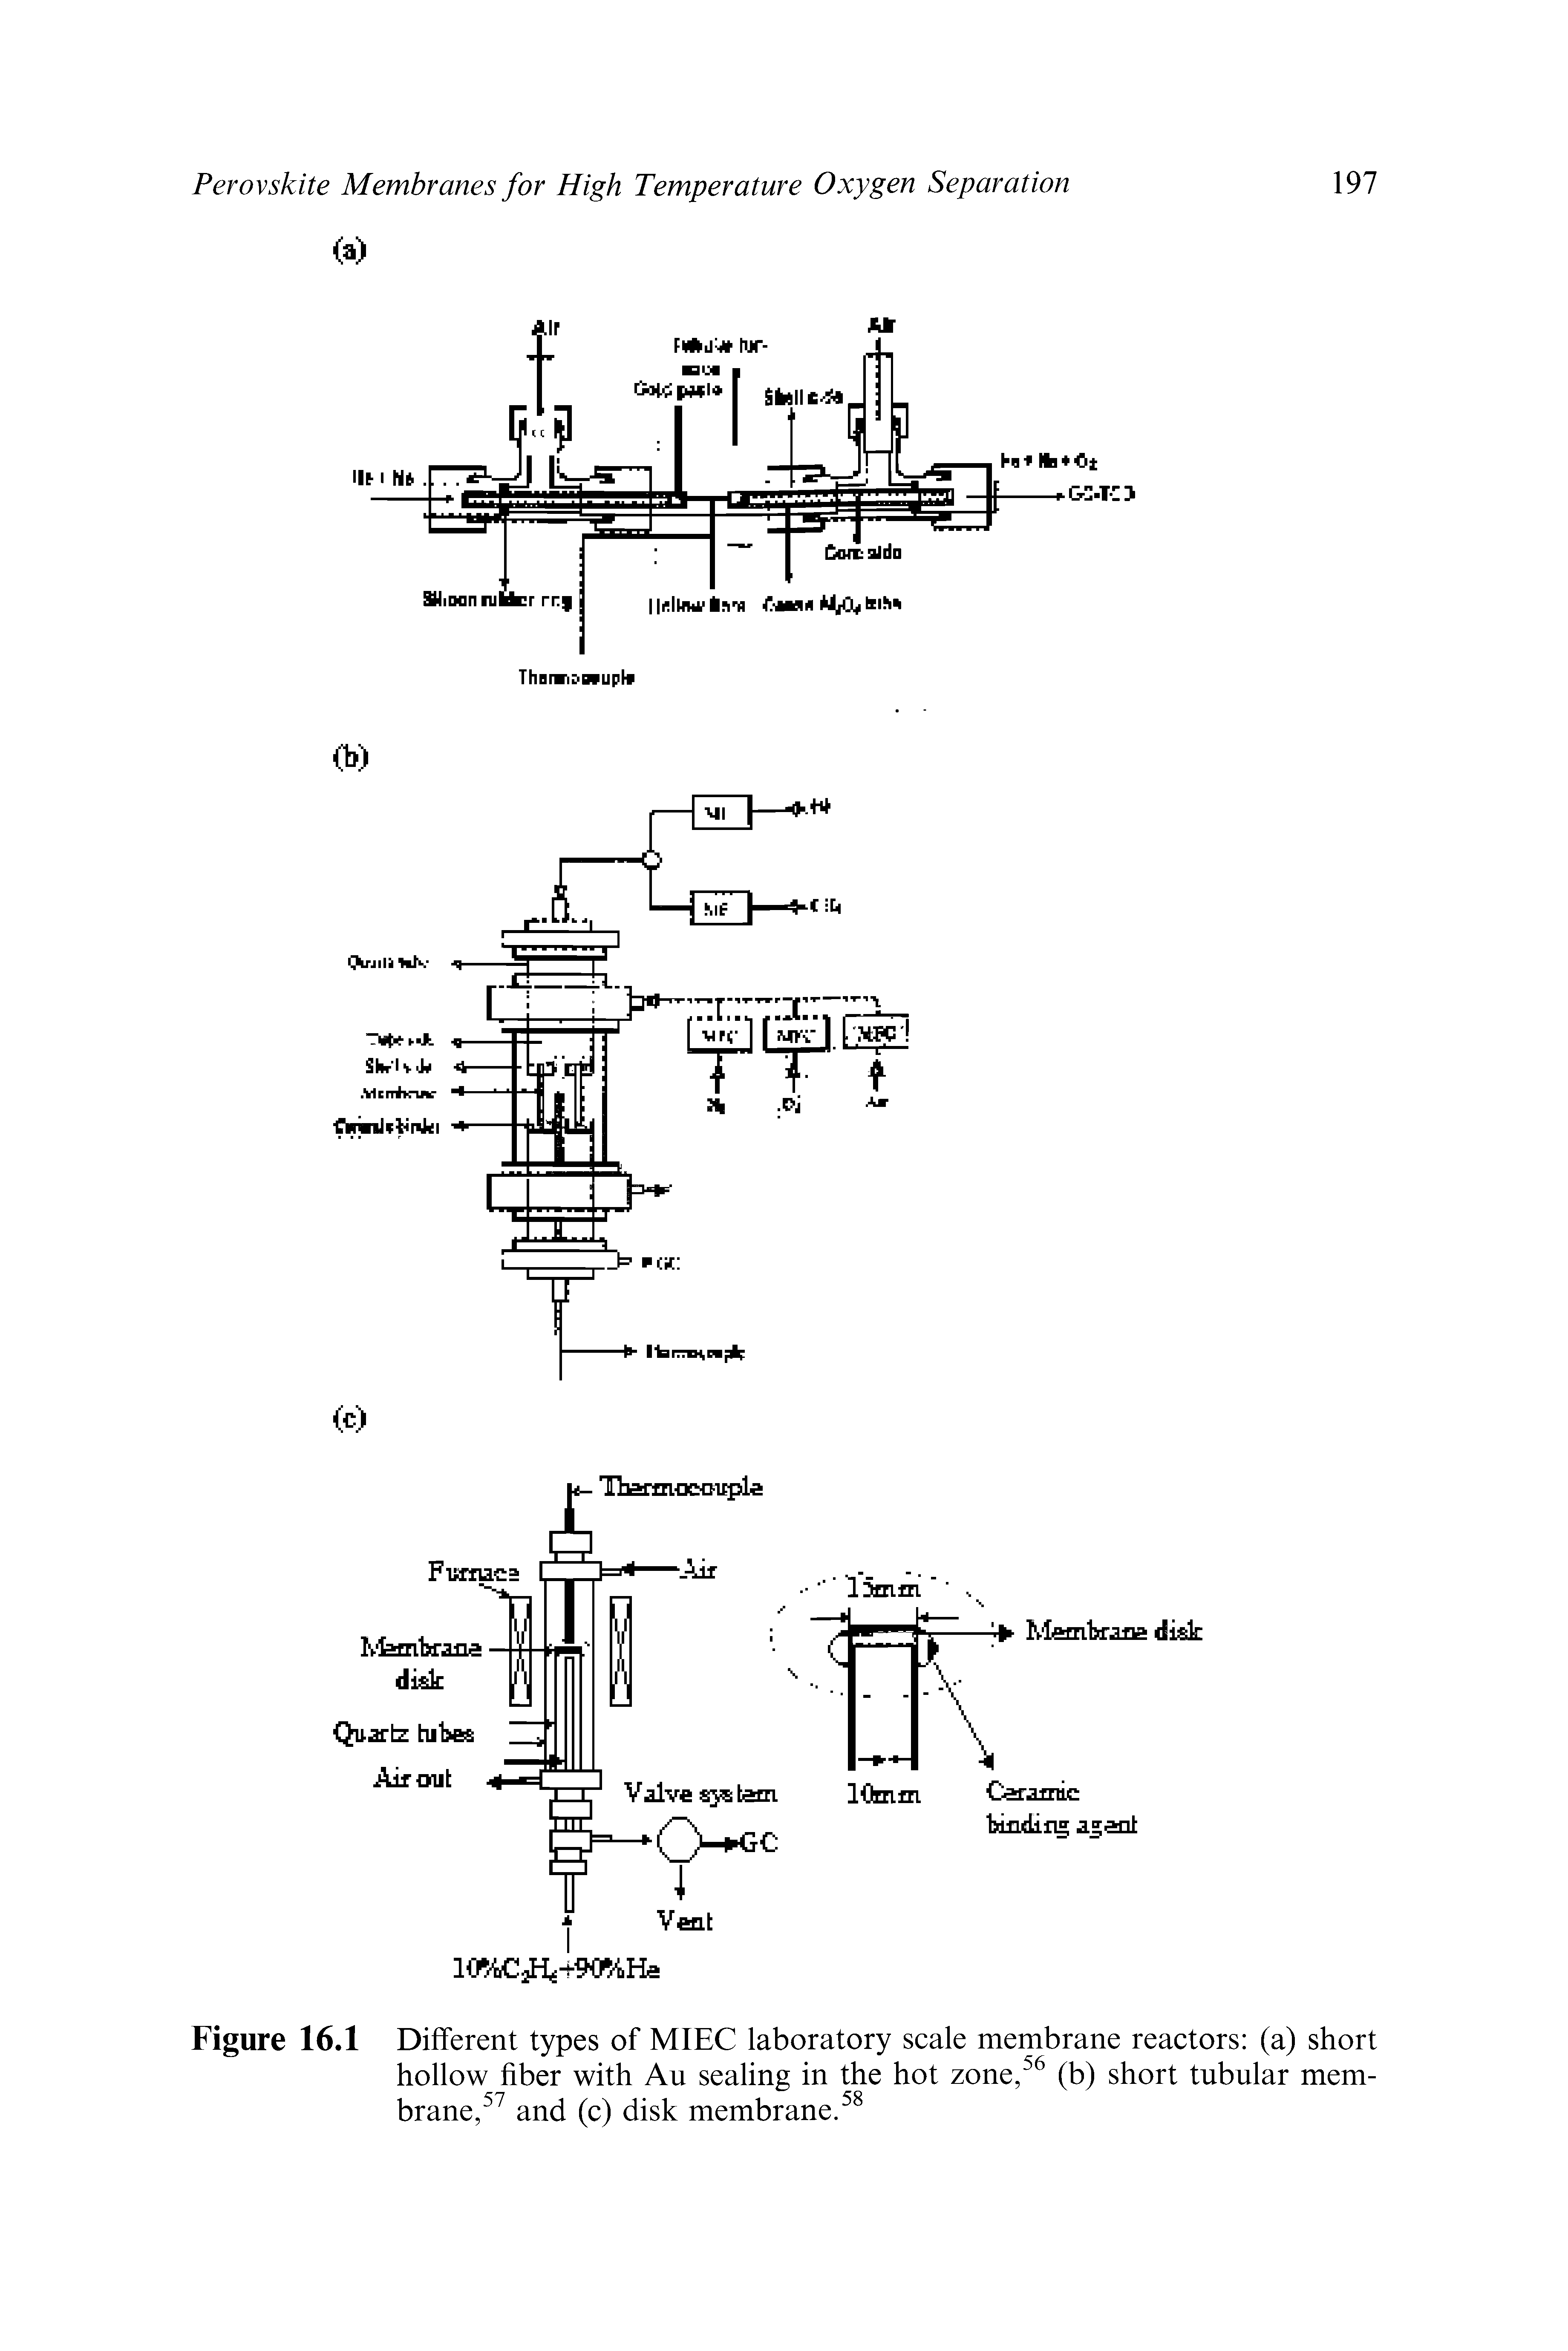 Figure 16.1 Different types of MIEC laboratory scale membrane reactors (a) short hollow fiber with Au sealing in the hot zone, (b) short tubular membrane, and (c) disk membrane.